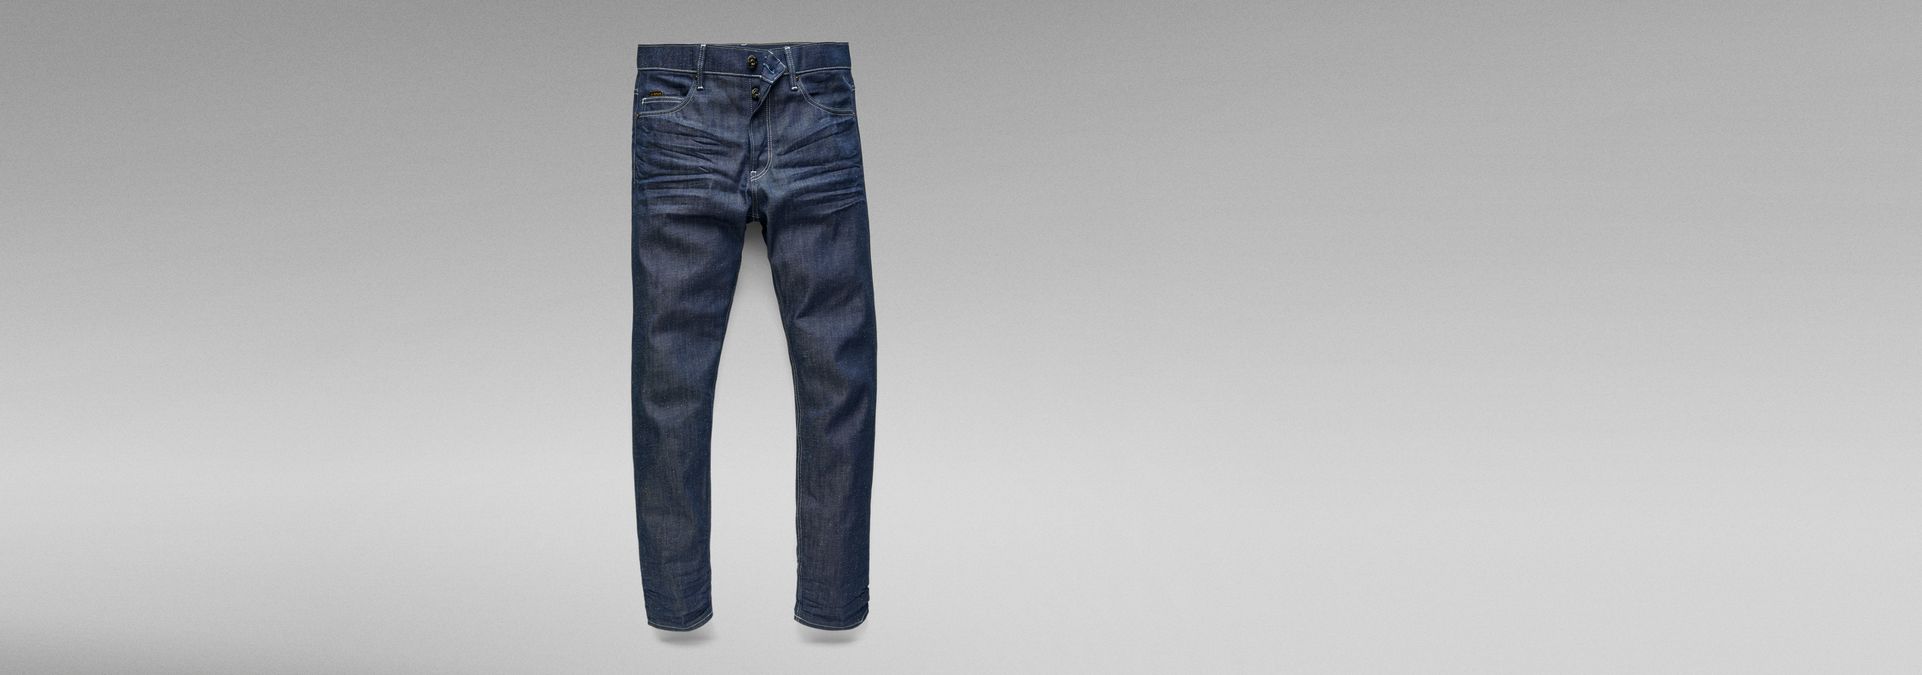 G-Star RAW Denim Grey in Blue for Men Mens Jeans G-Star RAW Jeans S Triple A Regular Straight Jeans 